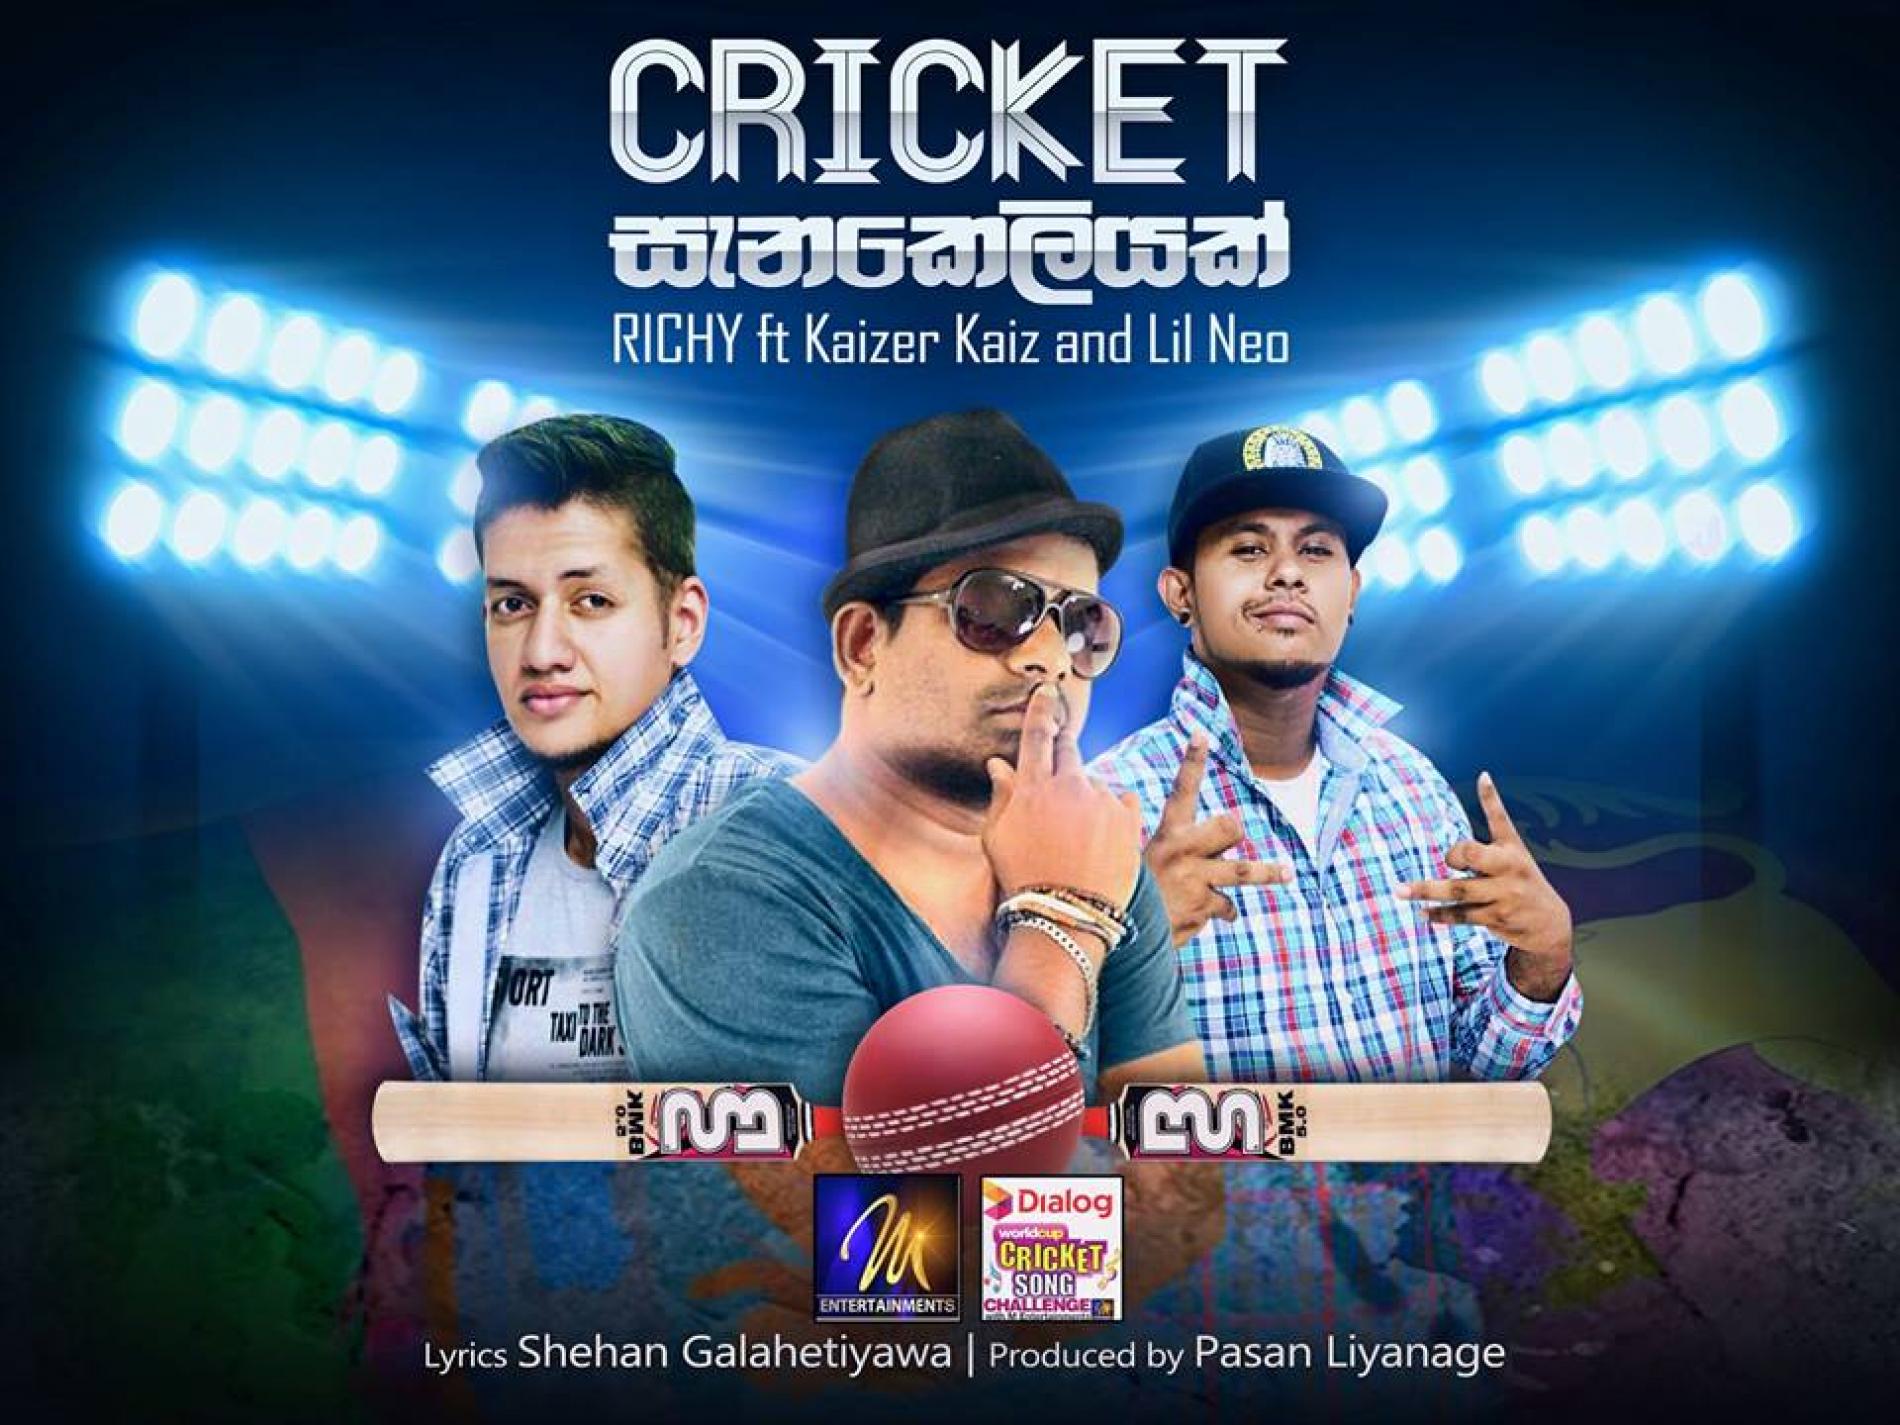 Richy Ft Kaizer Kaiz & Lil Neo – Another Cricket Song For The Season!